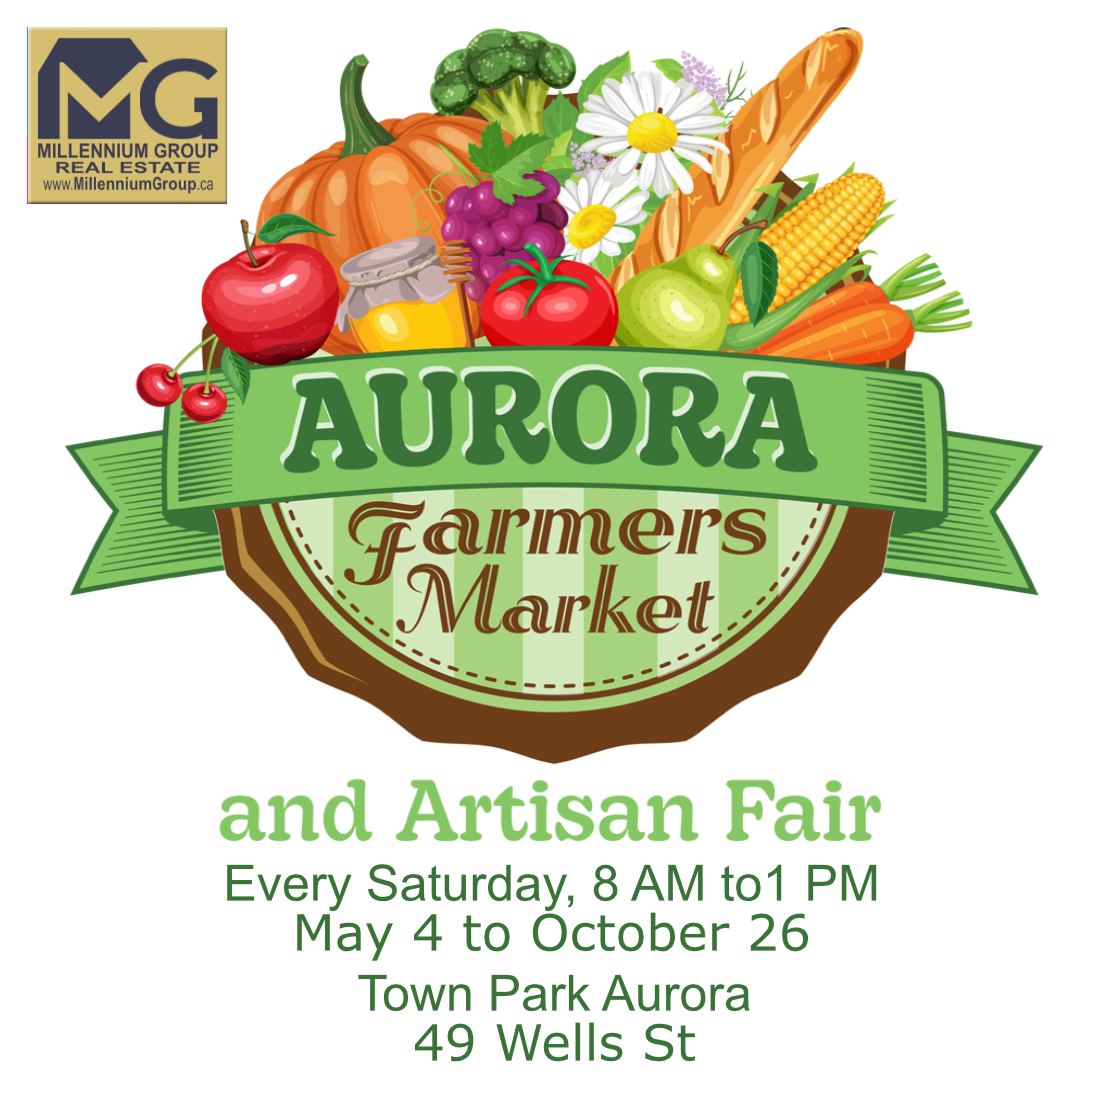 It's back! The Aurora Farmers Market happens every Saturday from 8 AM to 1 PM ending October 26. Get yourself some farm fresh food tomorrow morning! 🥬🥕🌽

#AuroraFarmersMarket #FarmersMarket #KendraCutroneBroker #TonyCutroneRealtor #MillenniumGroupRealEstate #FREEHomeEvaluation